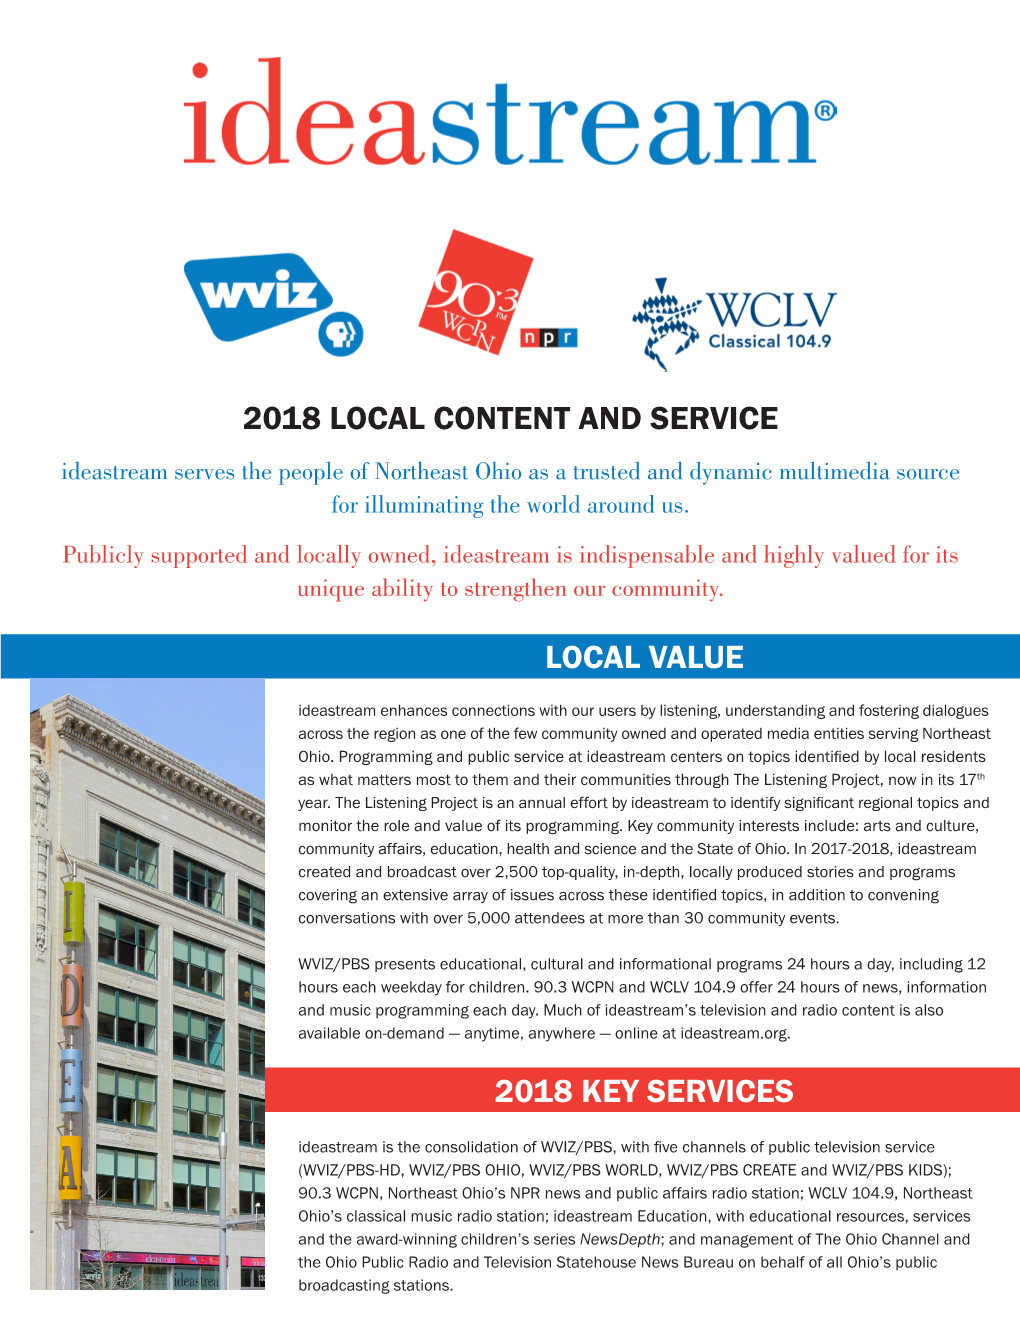 Local Value 2018 Key Services 2018 Local Content And